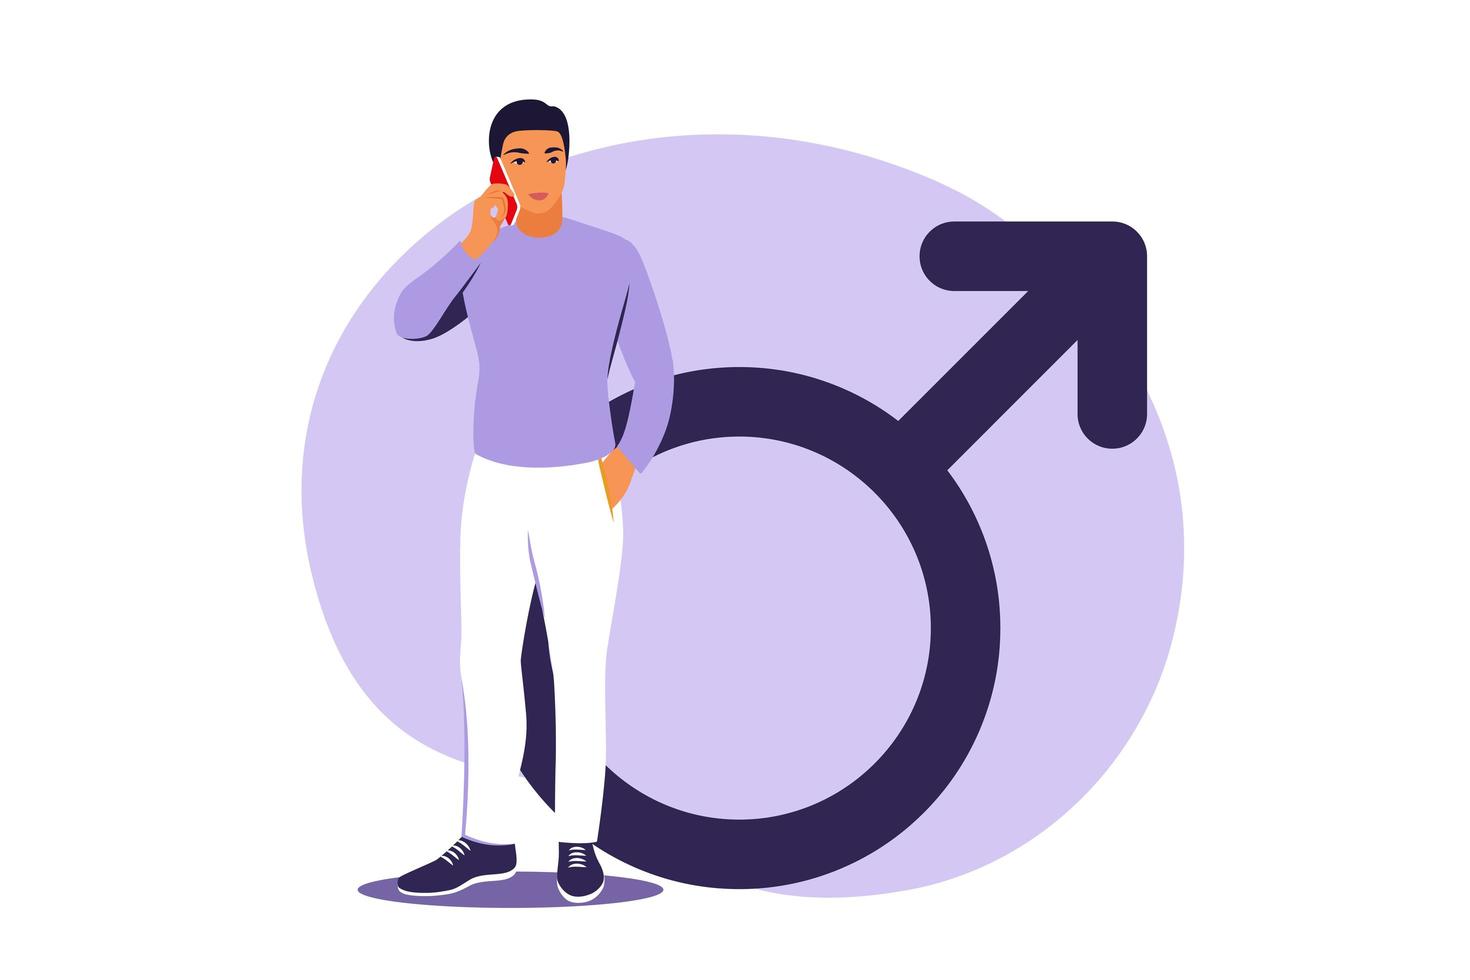 Male symbol. A man stands next to a gender icon. Vector illustration. Flat.